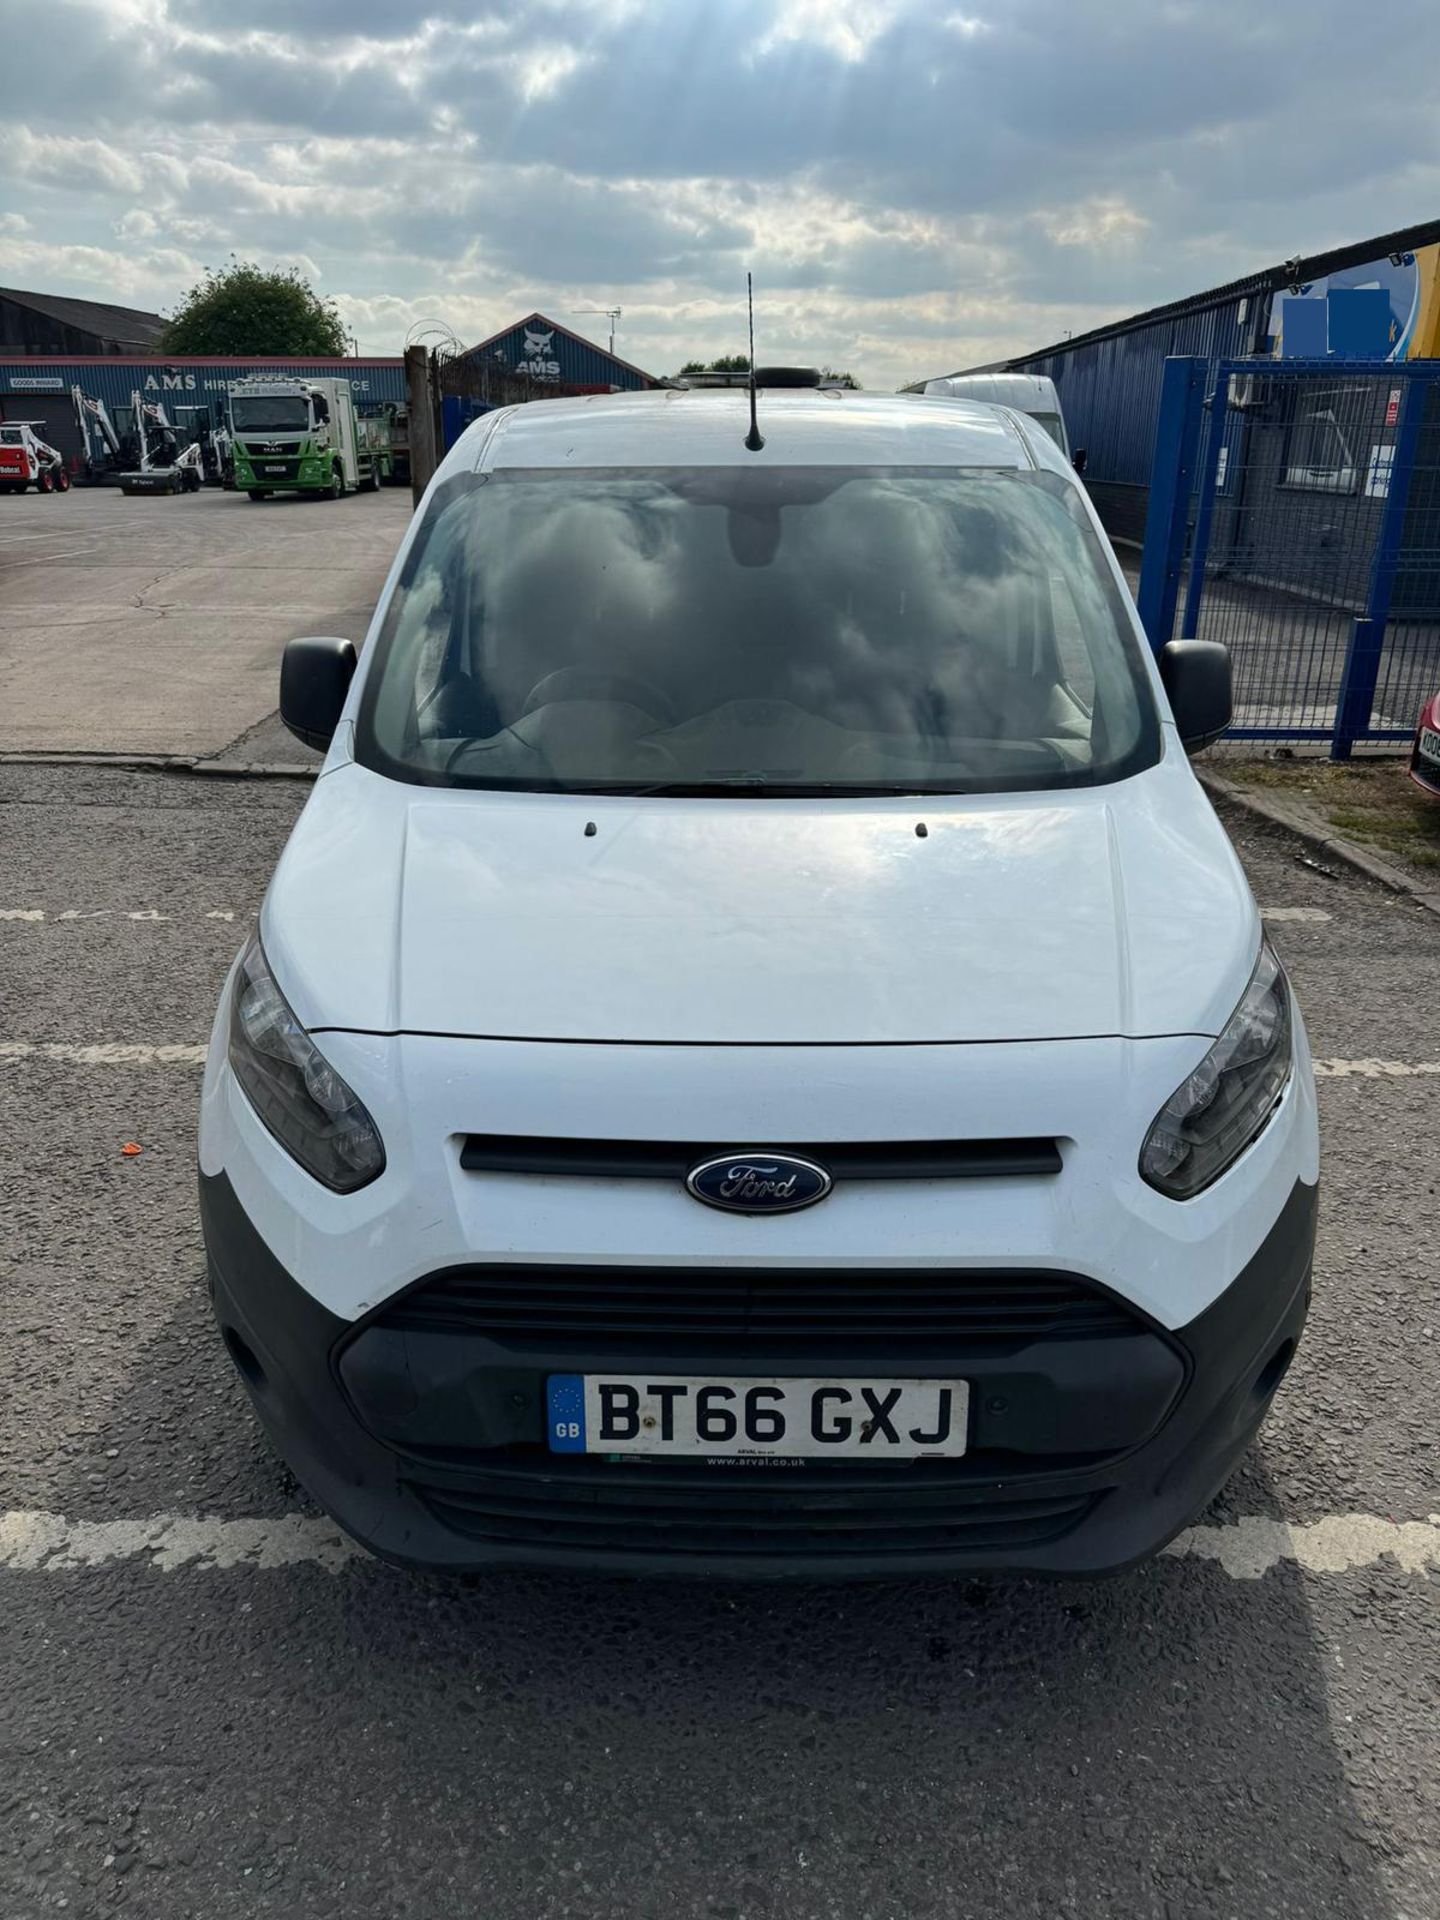 2016 66 FORD TRANSIT CONNECT LWB PANEL VAN - 123K MILES - AIR CON - Image 5 of 6